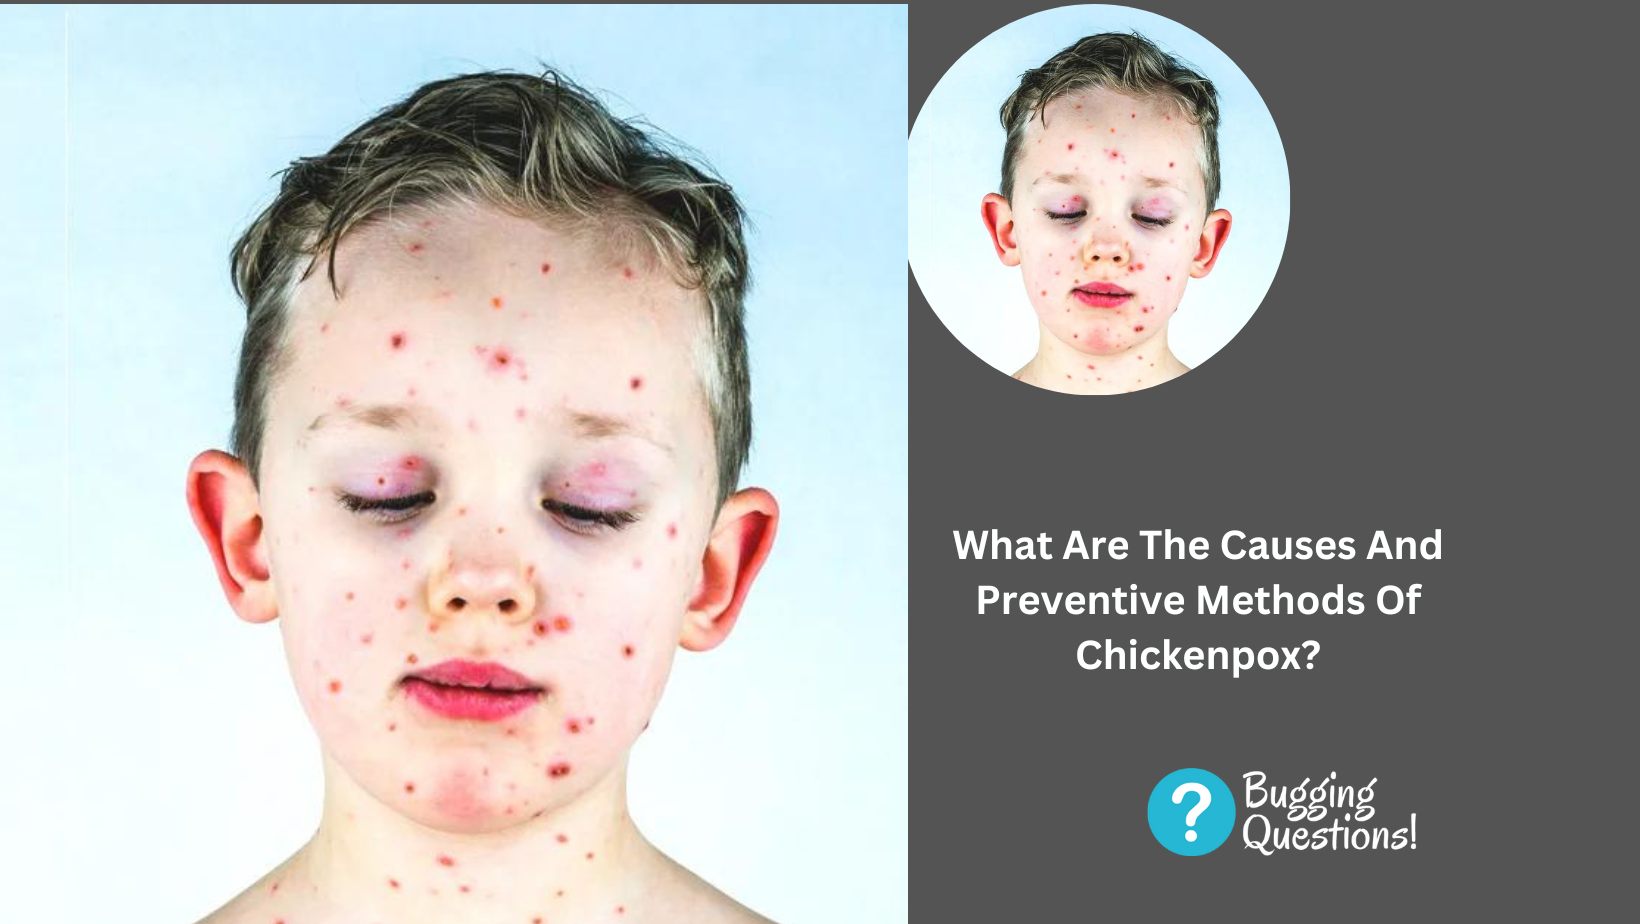 What Are The Causes And Preventive Methods Of Chickenpox?